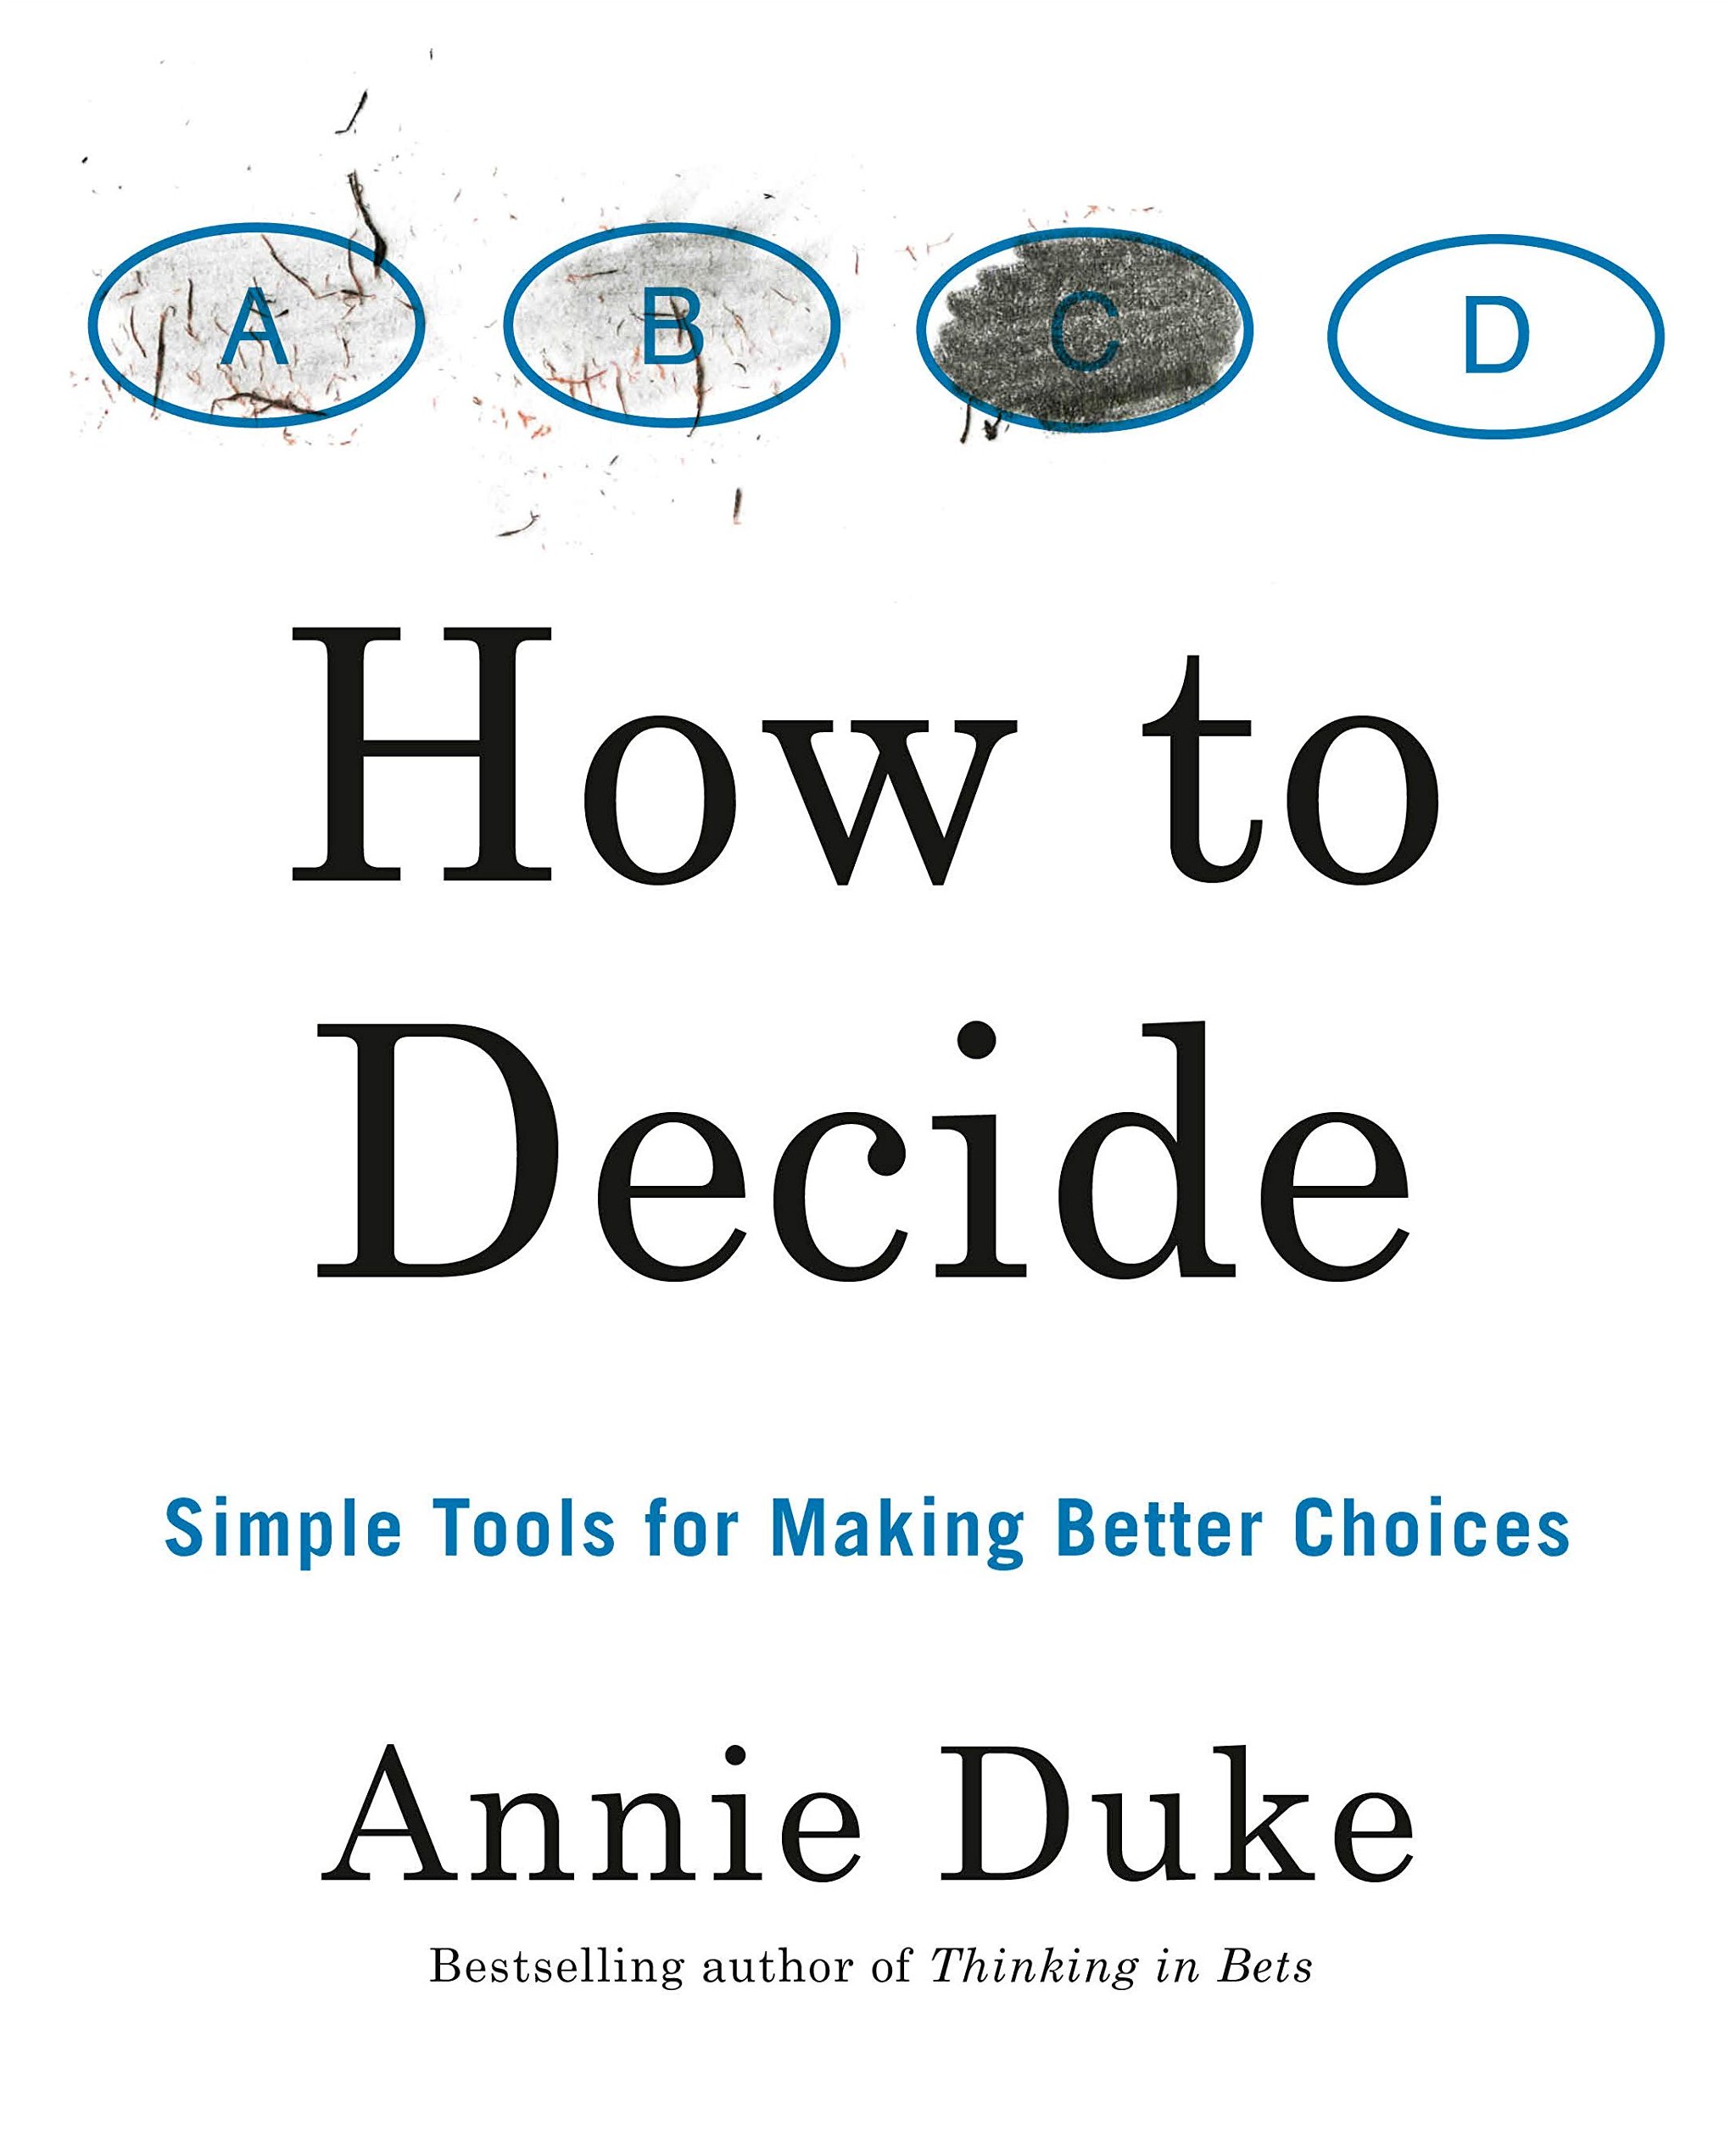 How to decide book cover